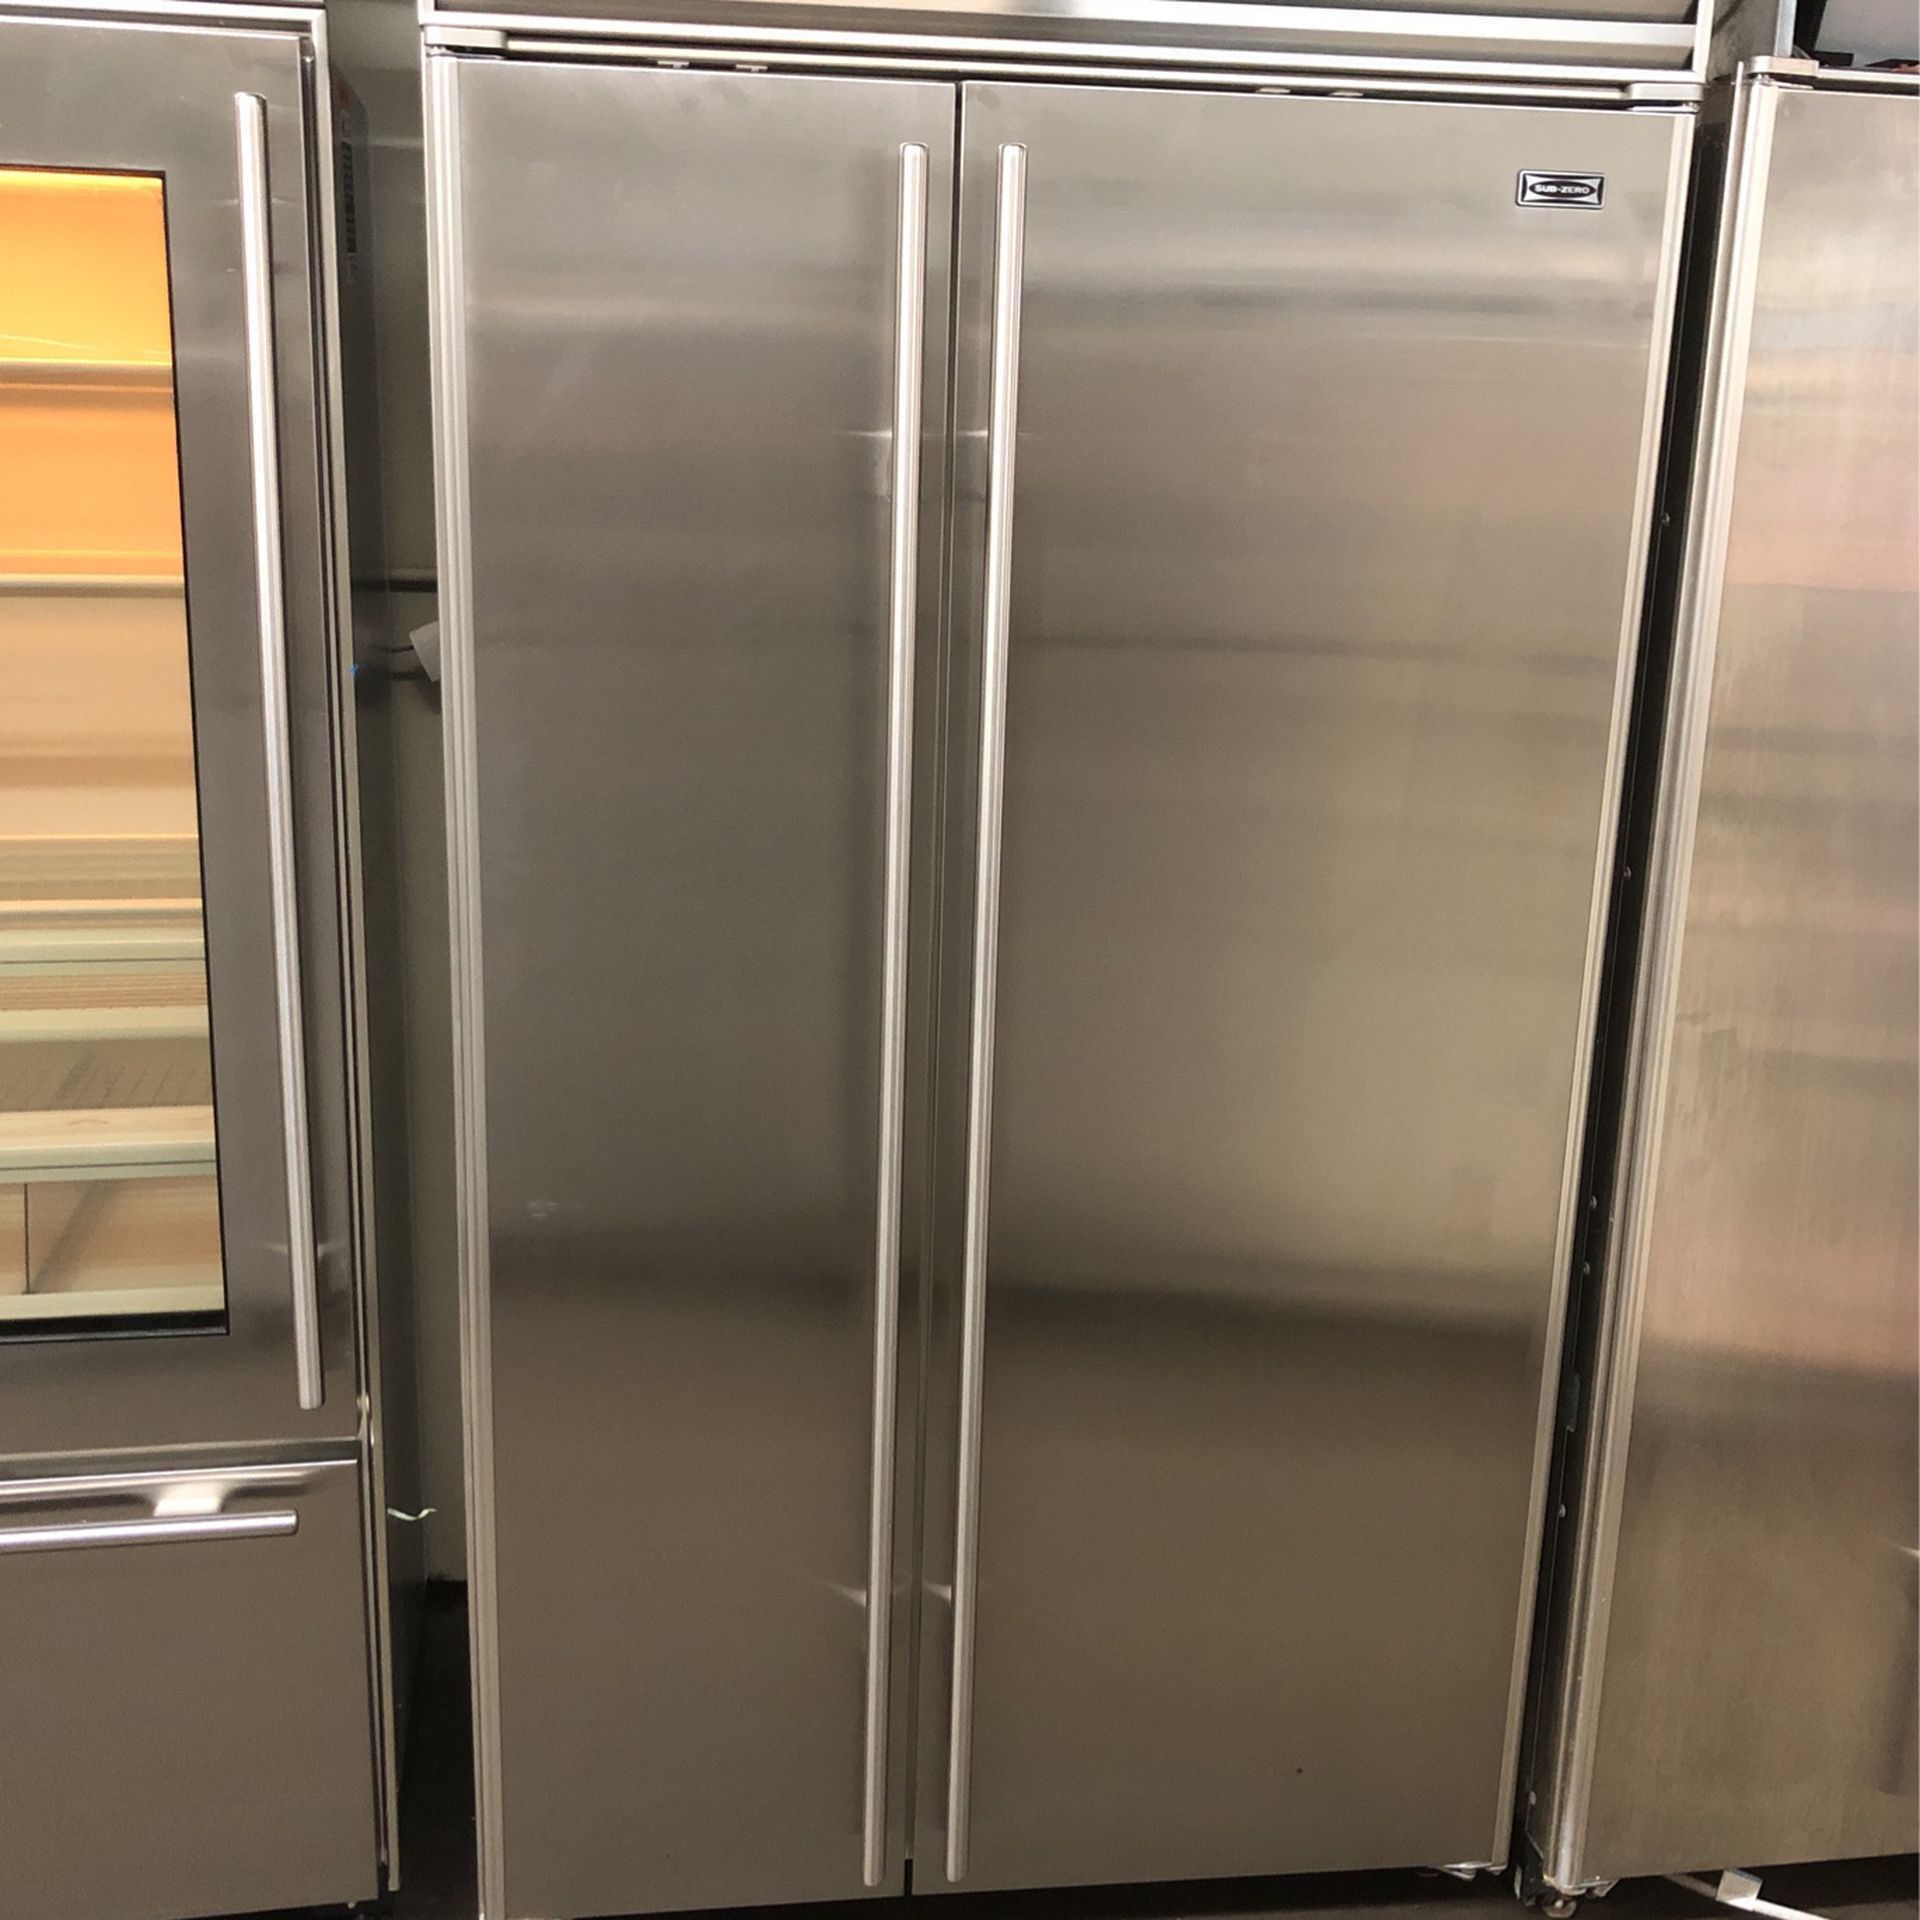 Sub Zero 42”Wide Stainless Steel Built In Refrigerator Side By Side 